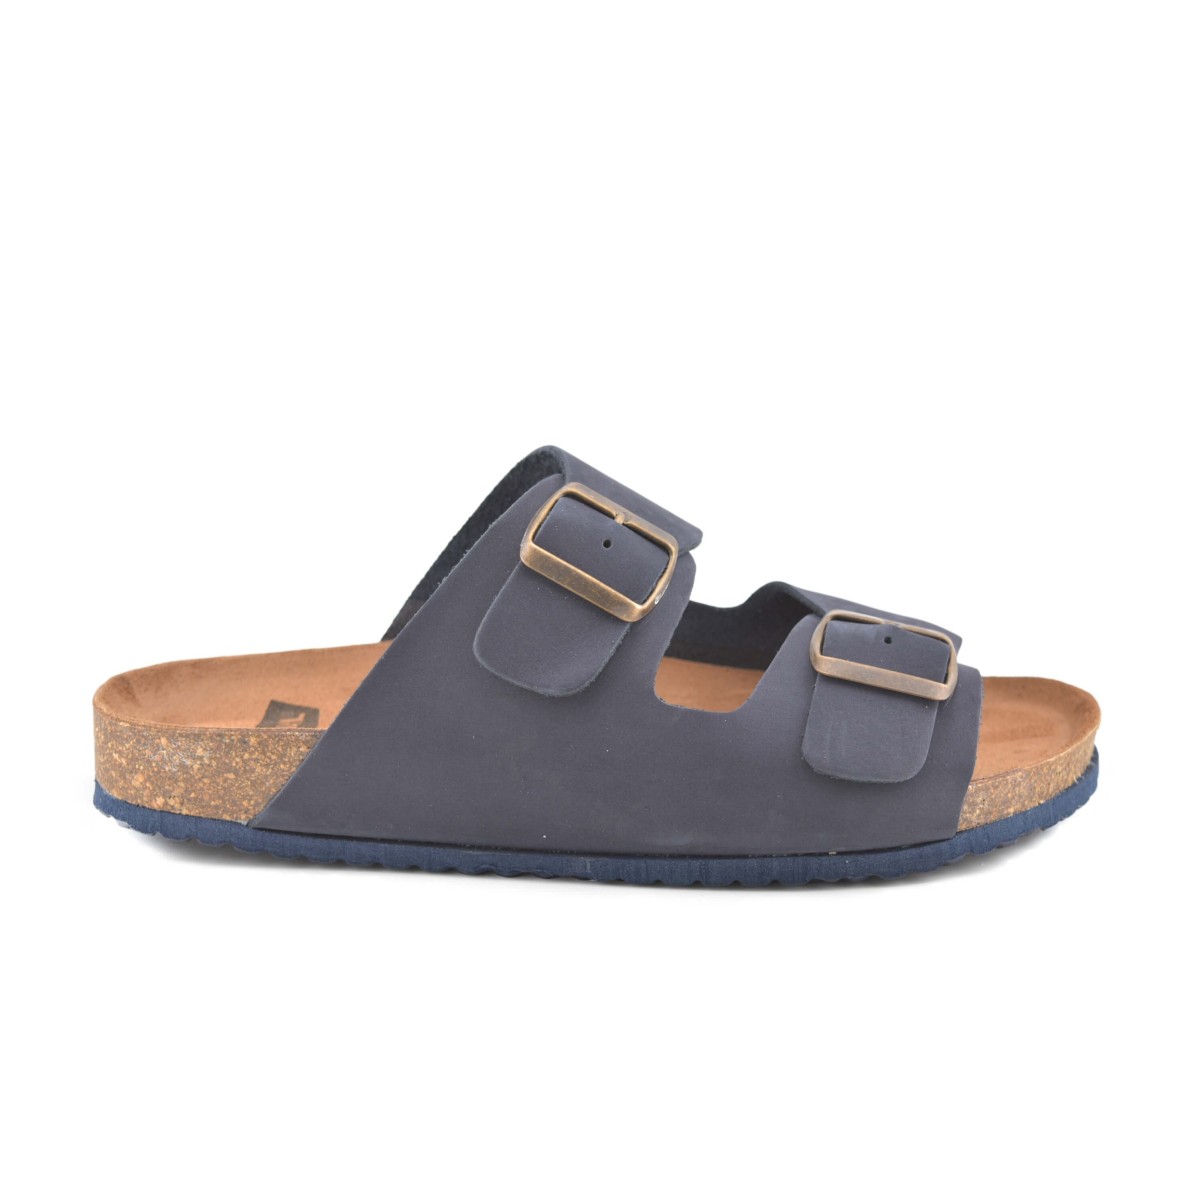 Bio men's blue leather sandals by Morxiva